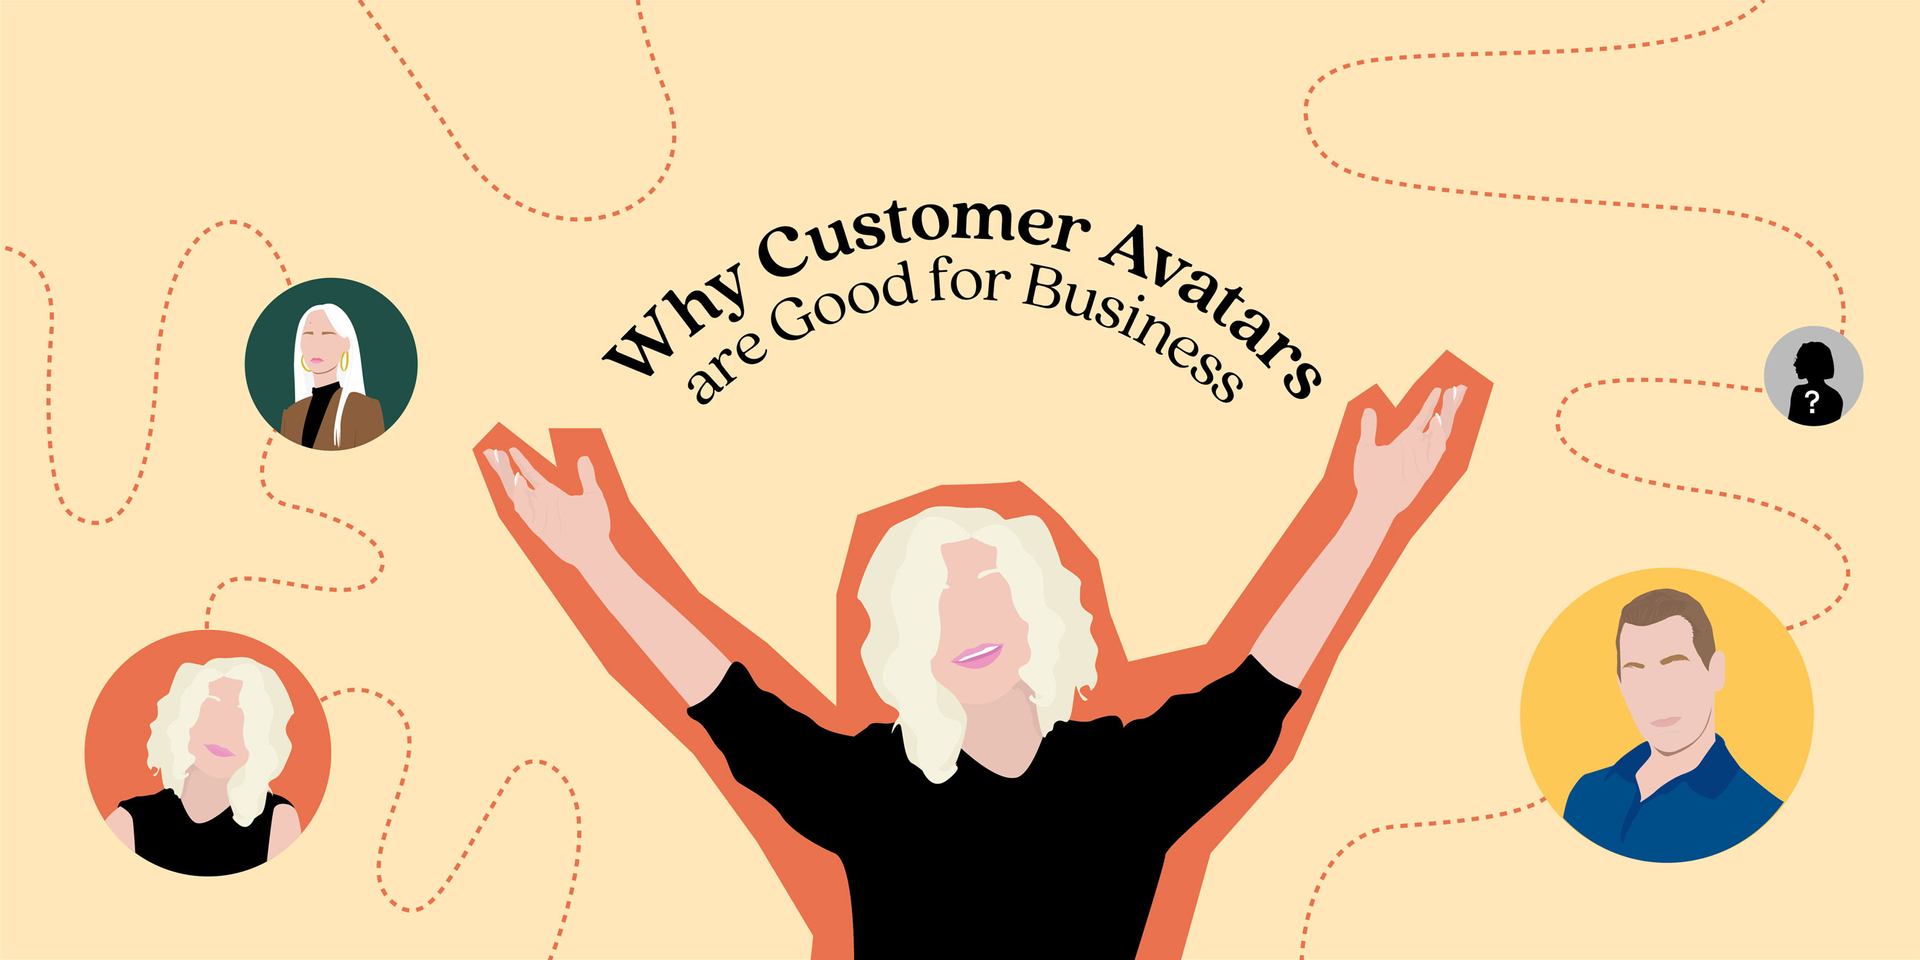 Why Customer Avatars are Good for Business